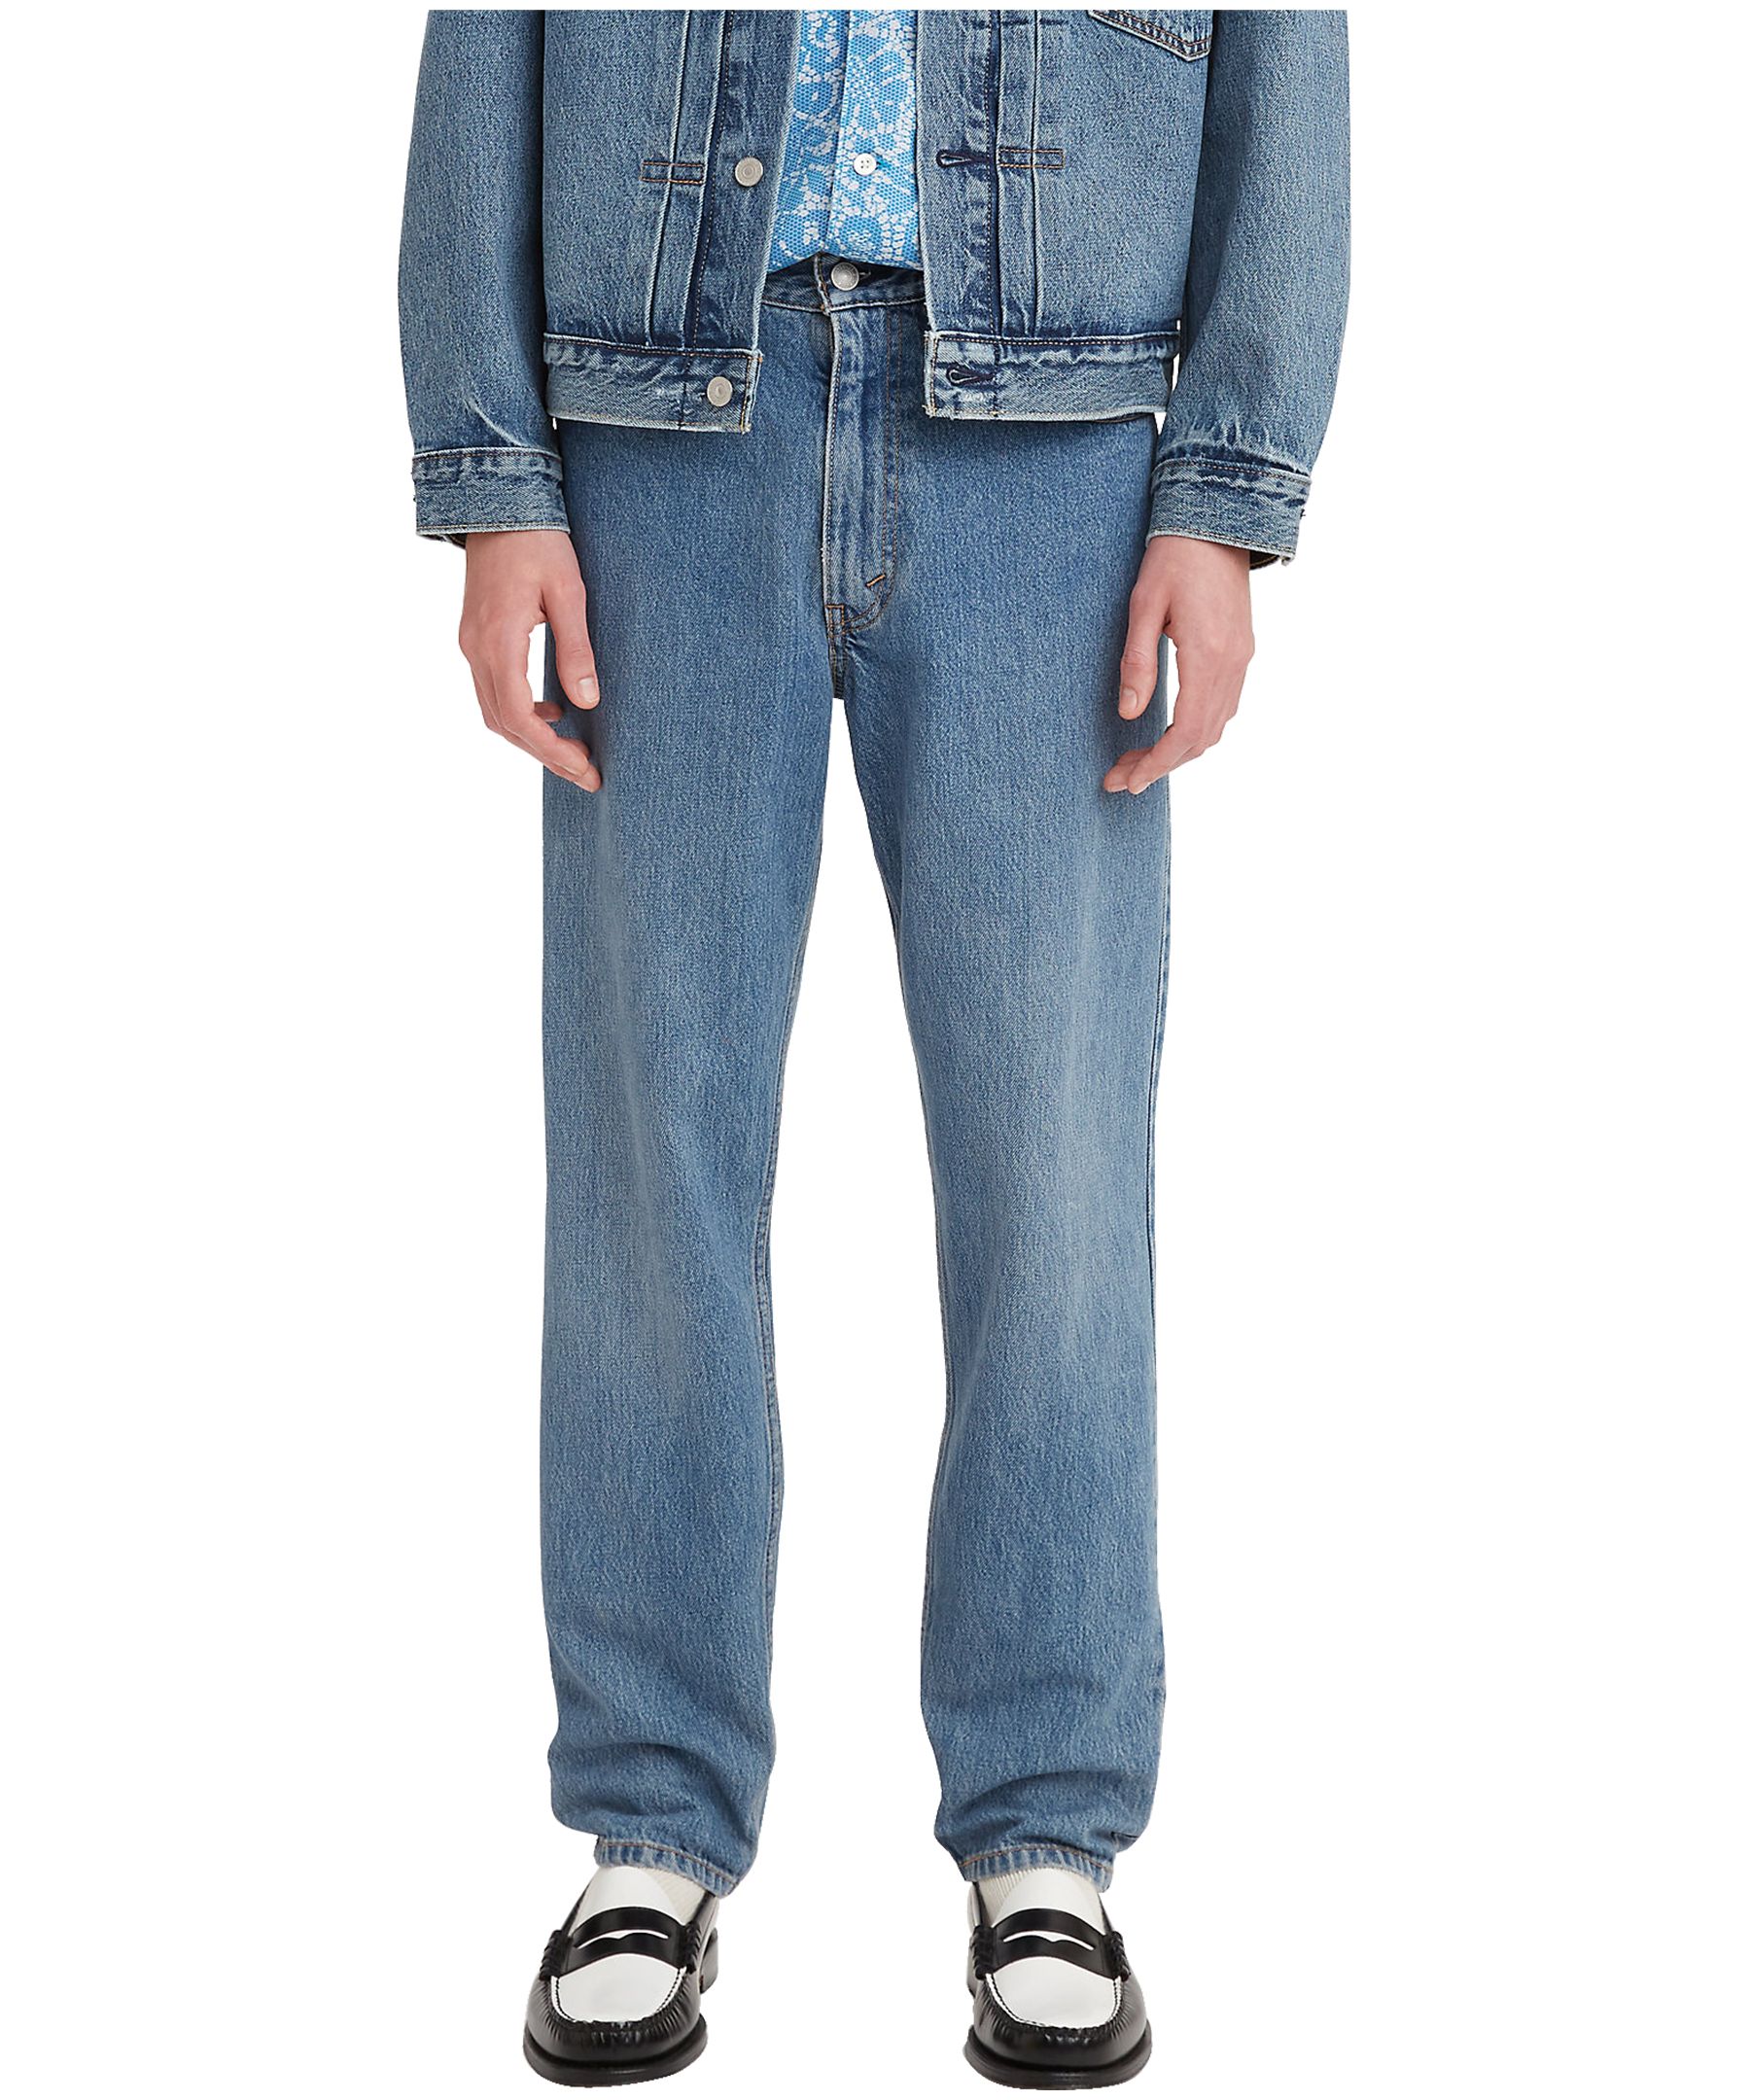 Levi's Men's 550 '92 Relaxed Fit Jeans